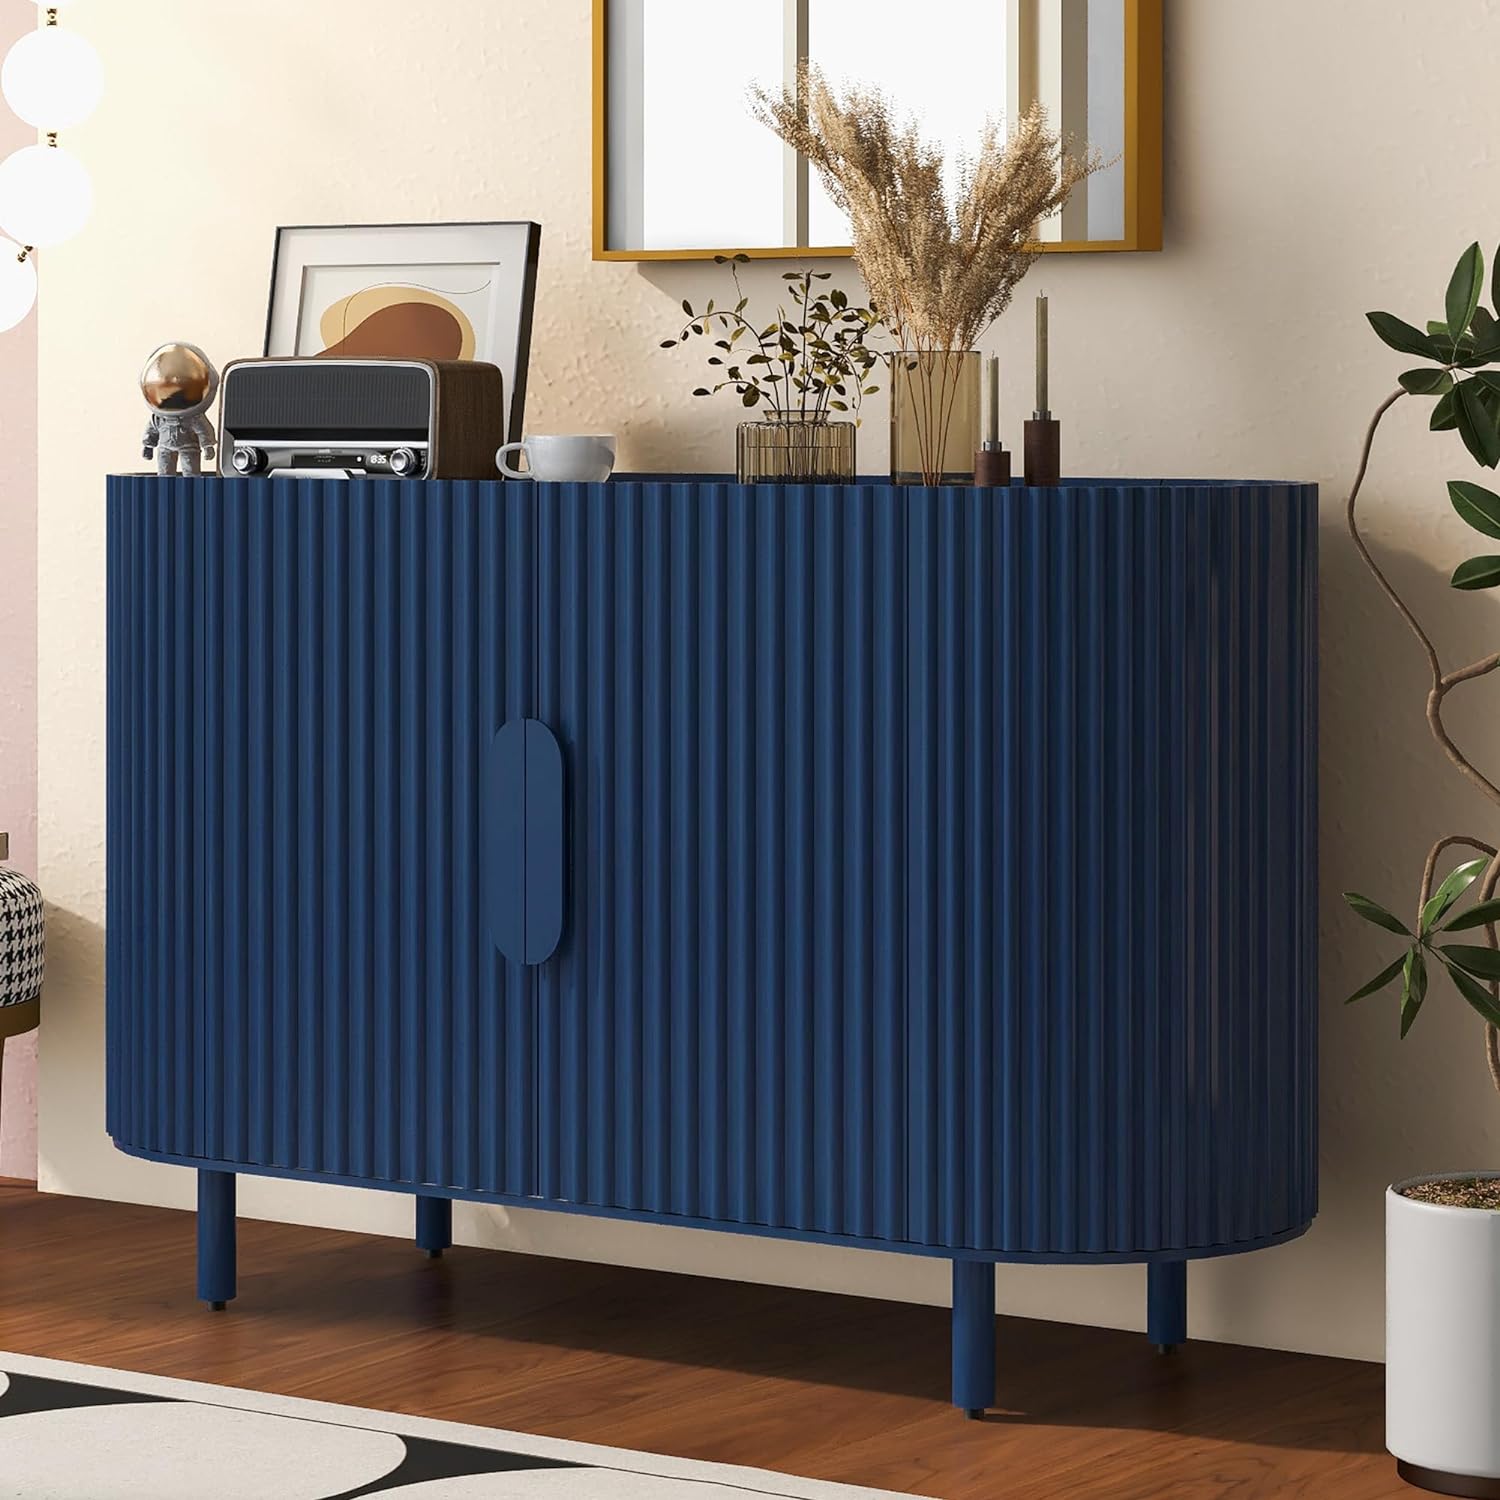 WILLIAMSPACE 47.8 Blue Sideboard Buffet Cabinet, Modern Curved Light Luxury Sideboard with Adjustable Shelves, 4-Door Wood Cabinet Suitable for Living Room, Study and Entrance (Blue)